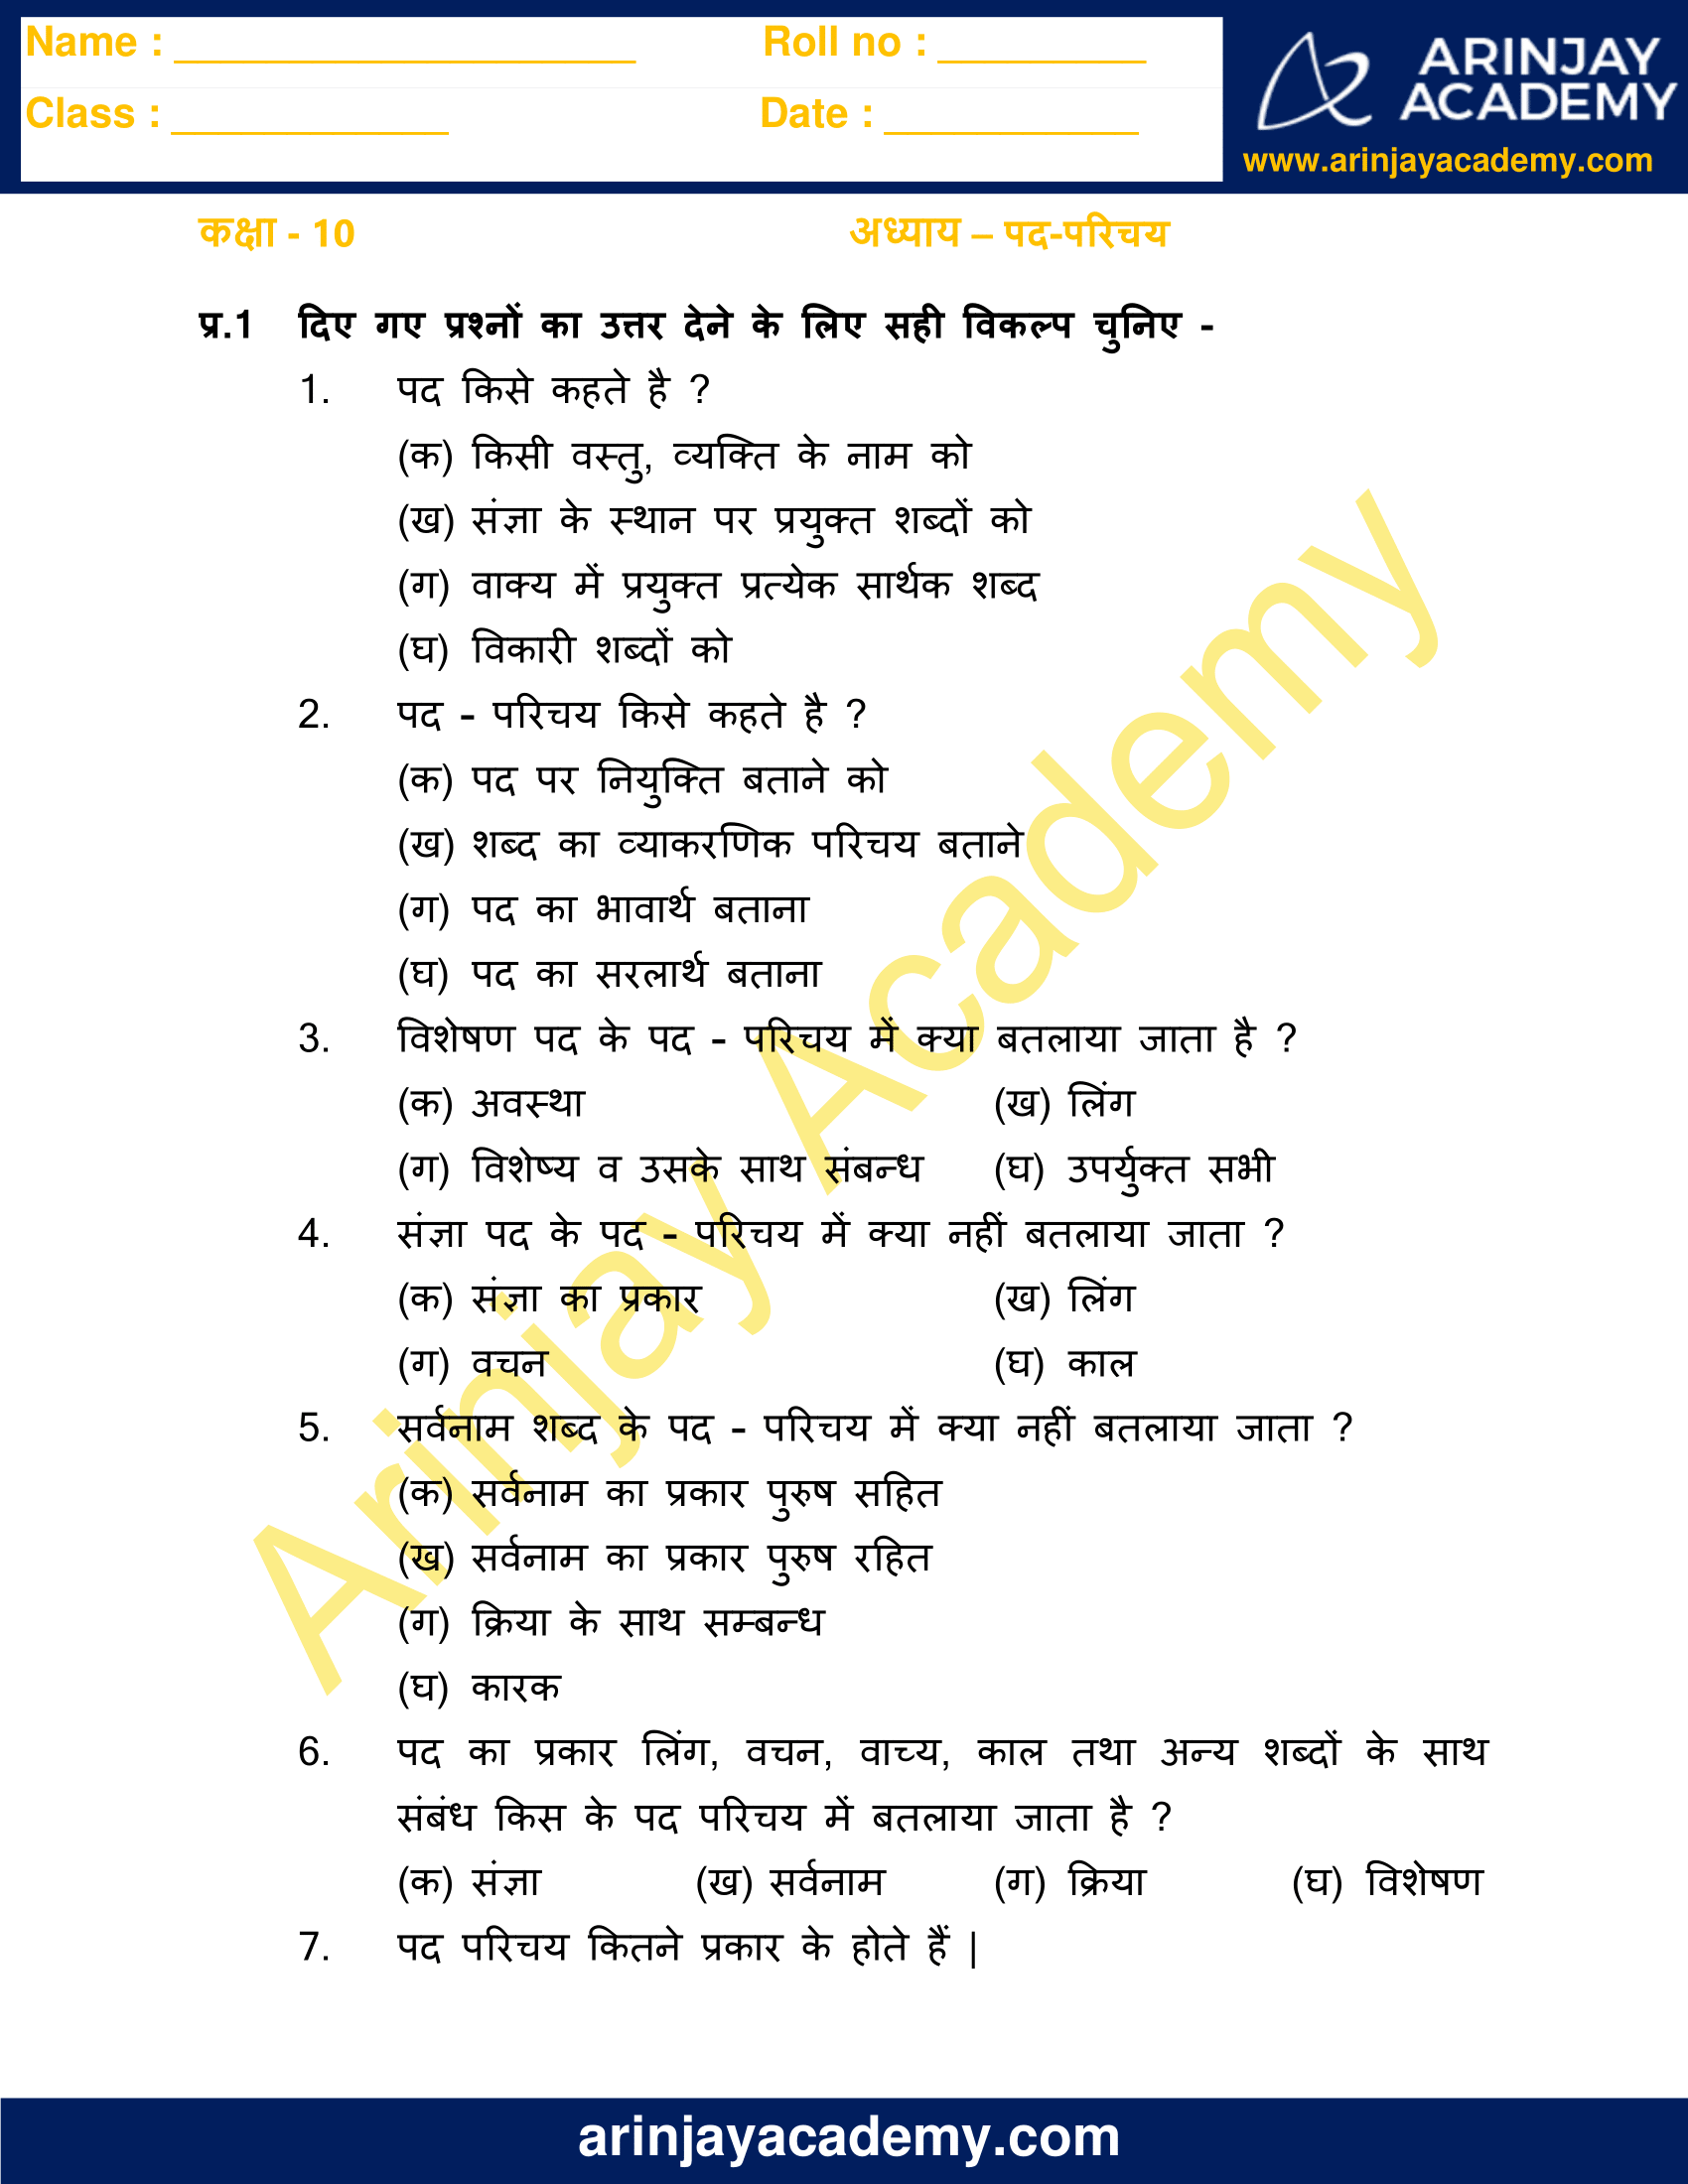 Pad Parichay Exercises with Answers Class 10 image 1